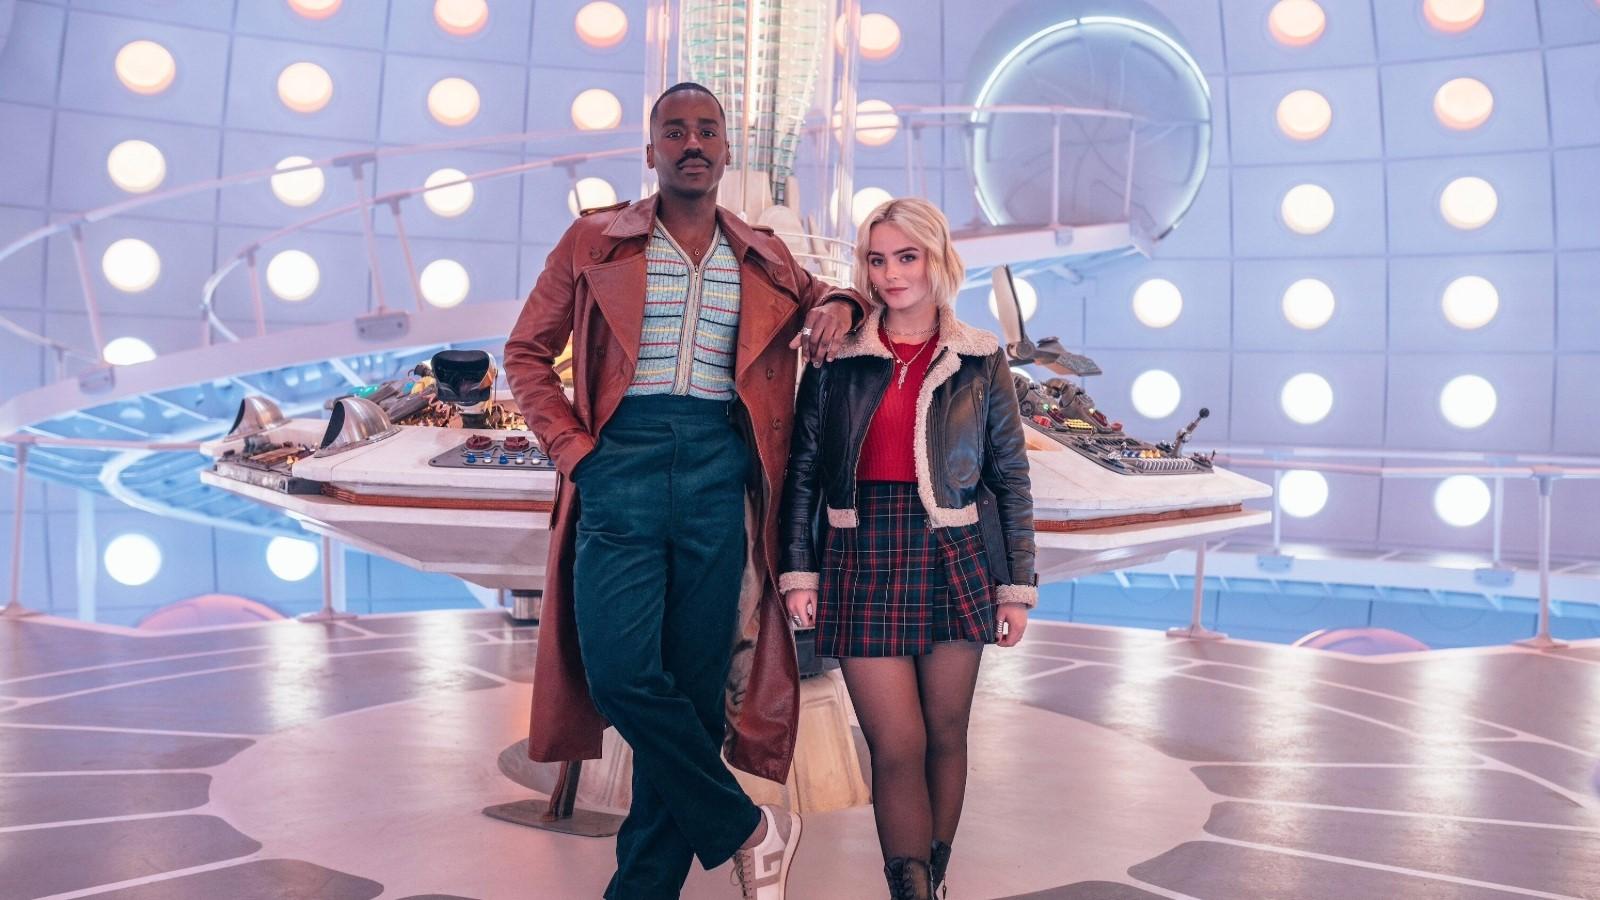 Ncuti Gatwa and Millie Gibson as the Doctor and Ruby inside the TARDIS in Doctor Who